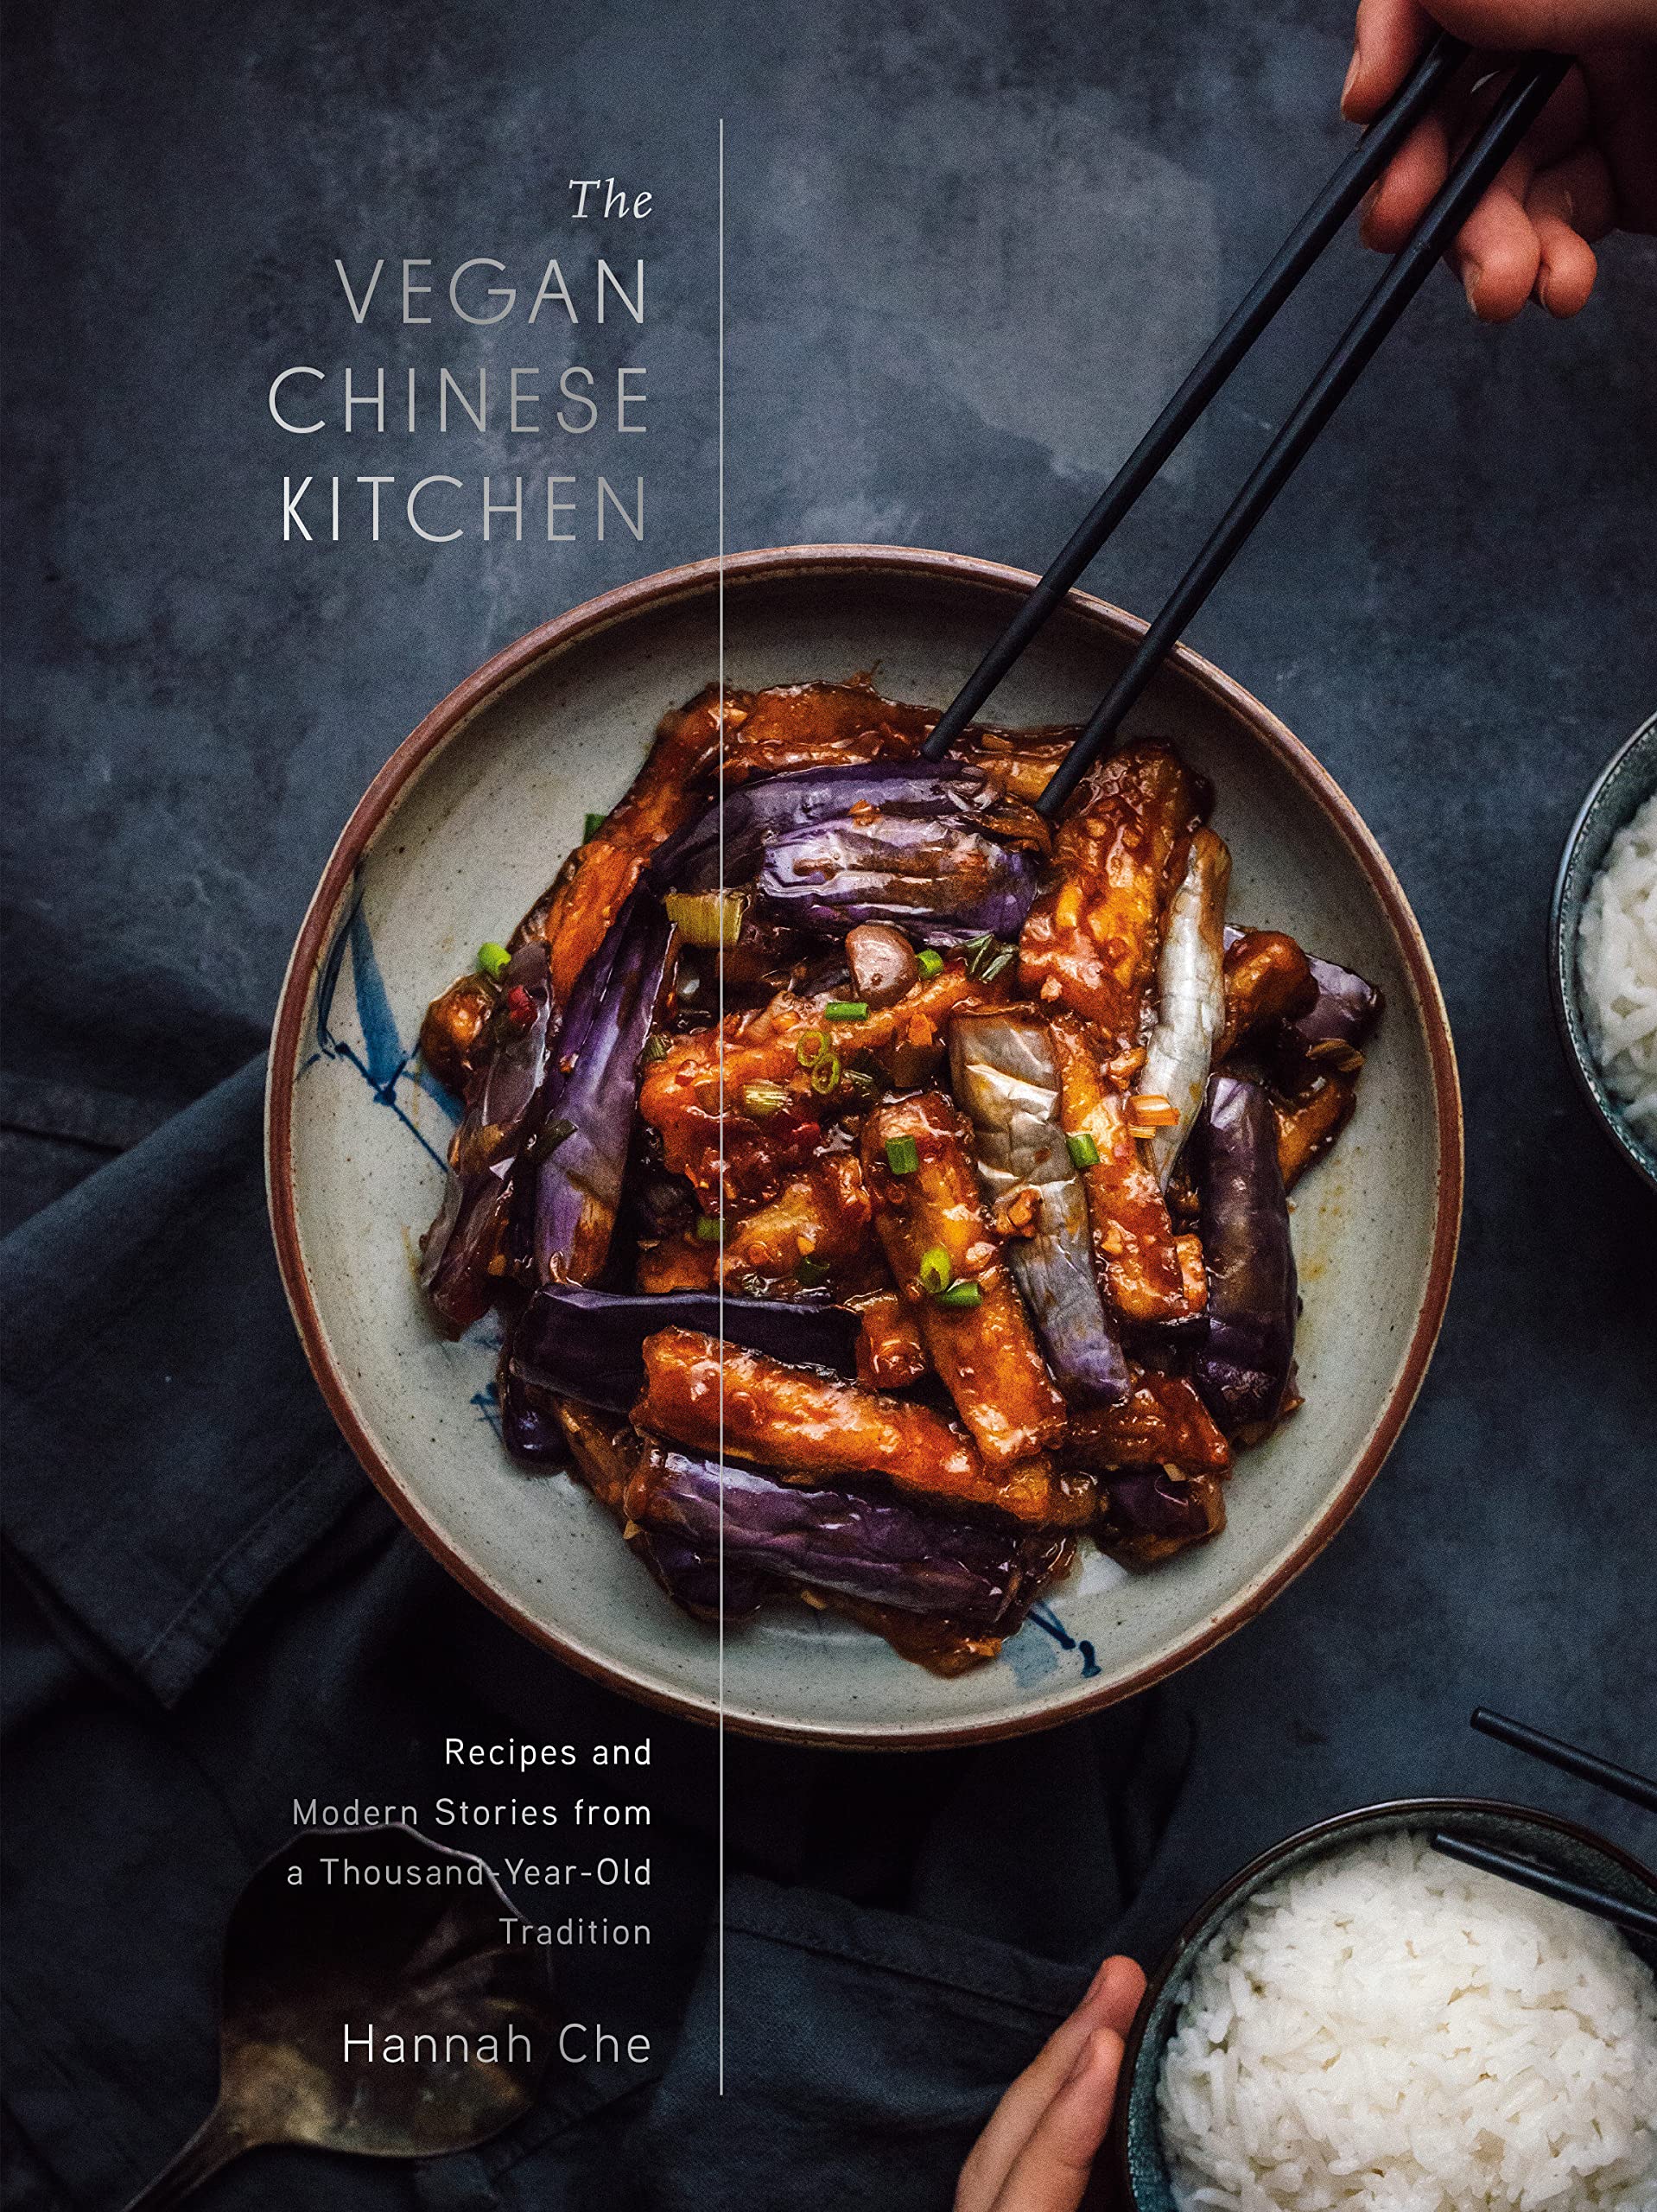 The Vegan Chinese Kitchen: Recipes and Modern Stories from a Thousand-Year-Old Tradition (Hannah Che)